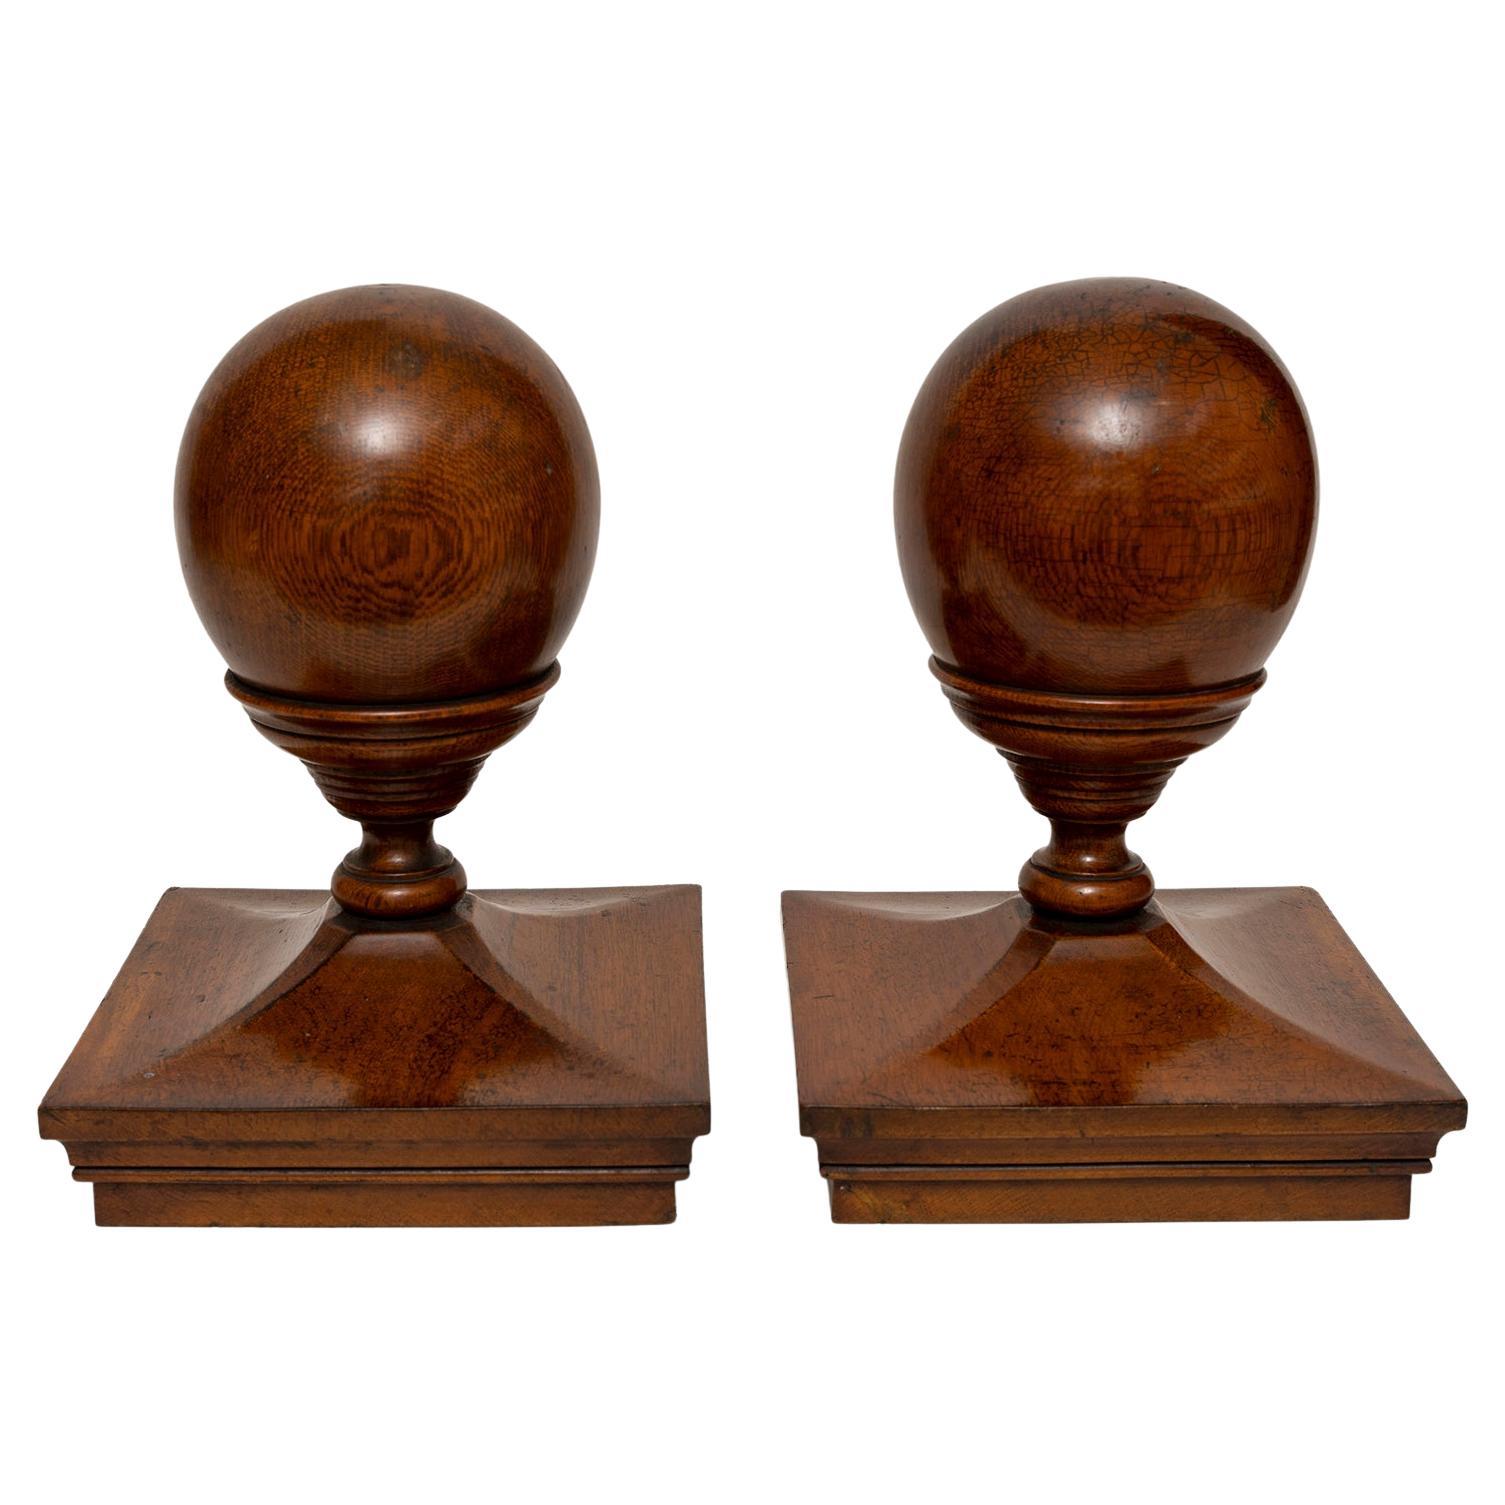 Capping Finial Newel Post Staircase Pair Oak Cup & Cover Ball 33cm 13" high For Sale